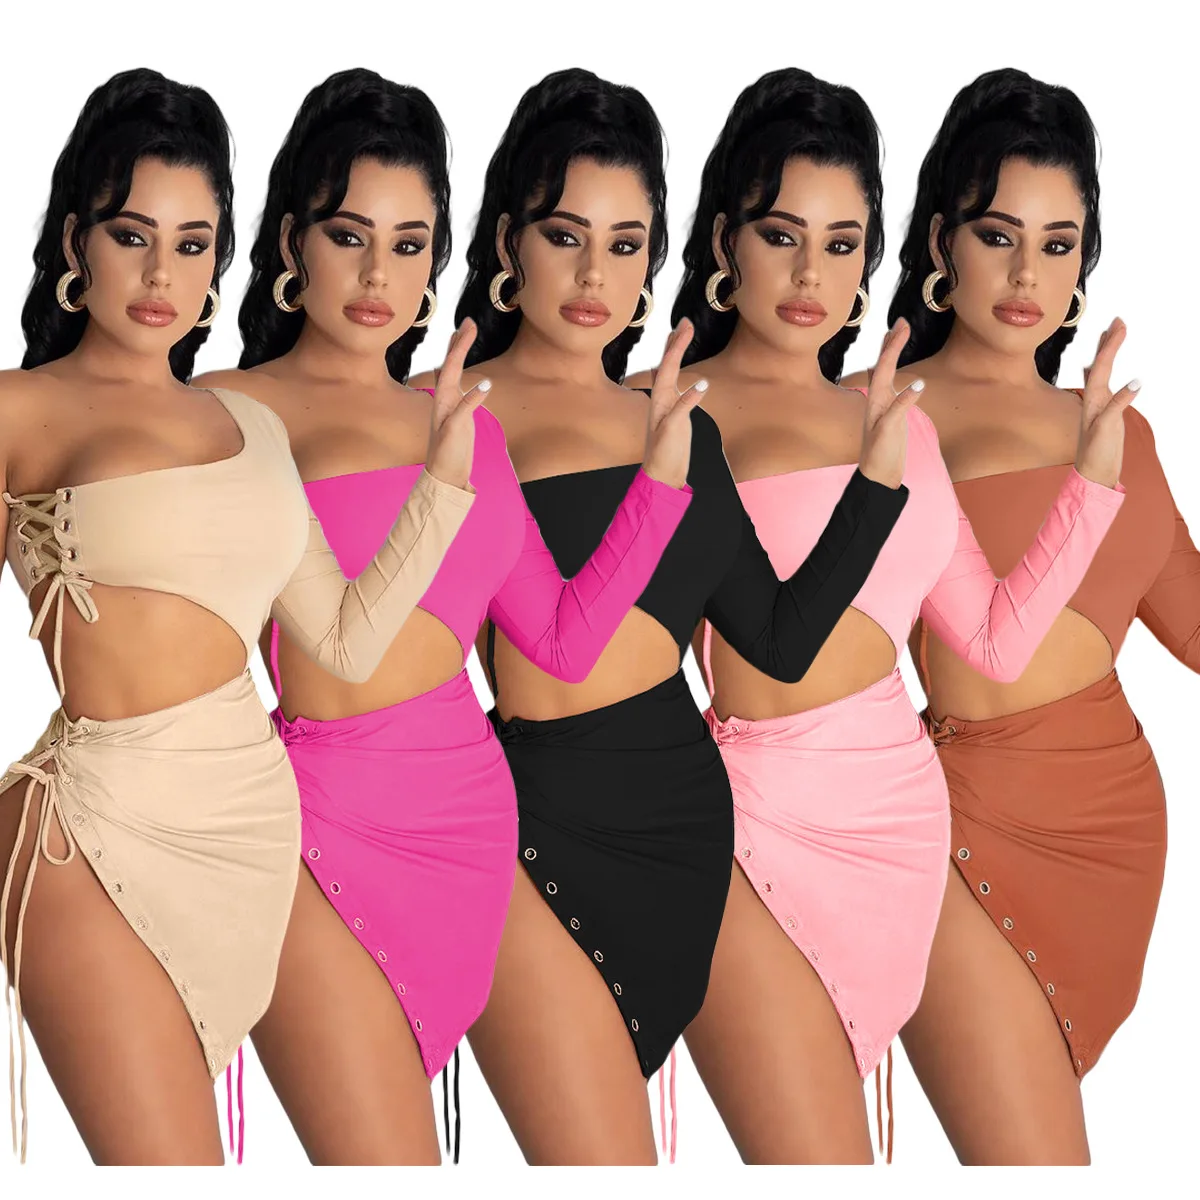 

2021 new arrive dress women clothing fashion sexy pink bandage dress solid color asymmetry 2 piece set, Picture shown